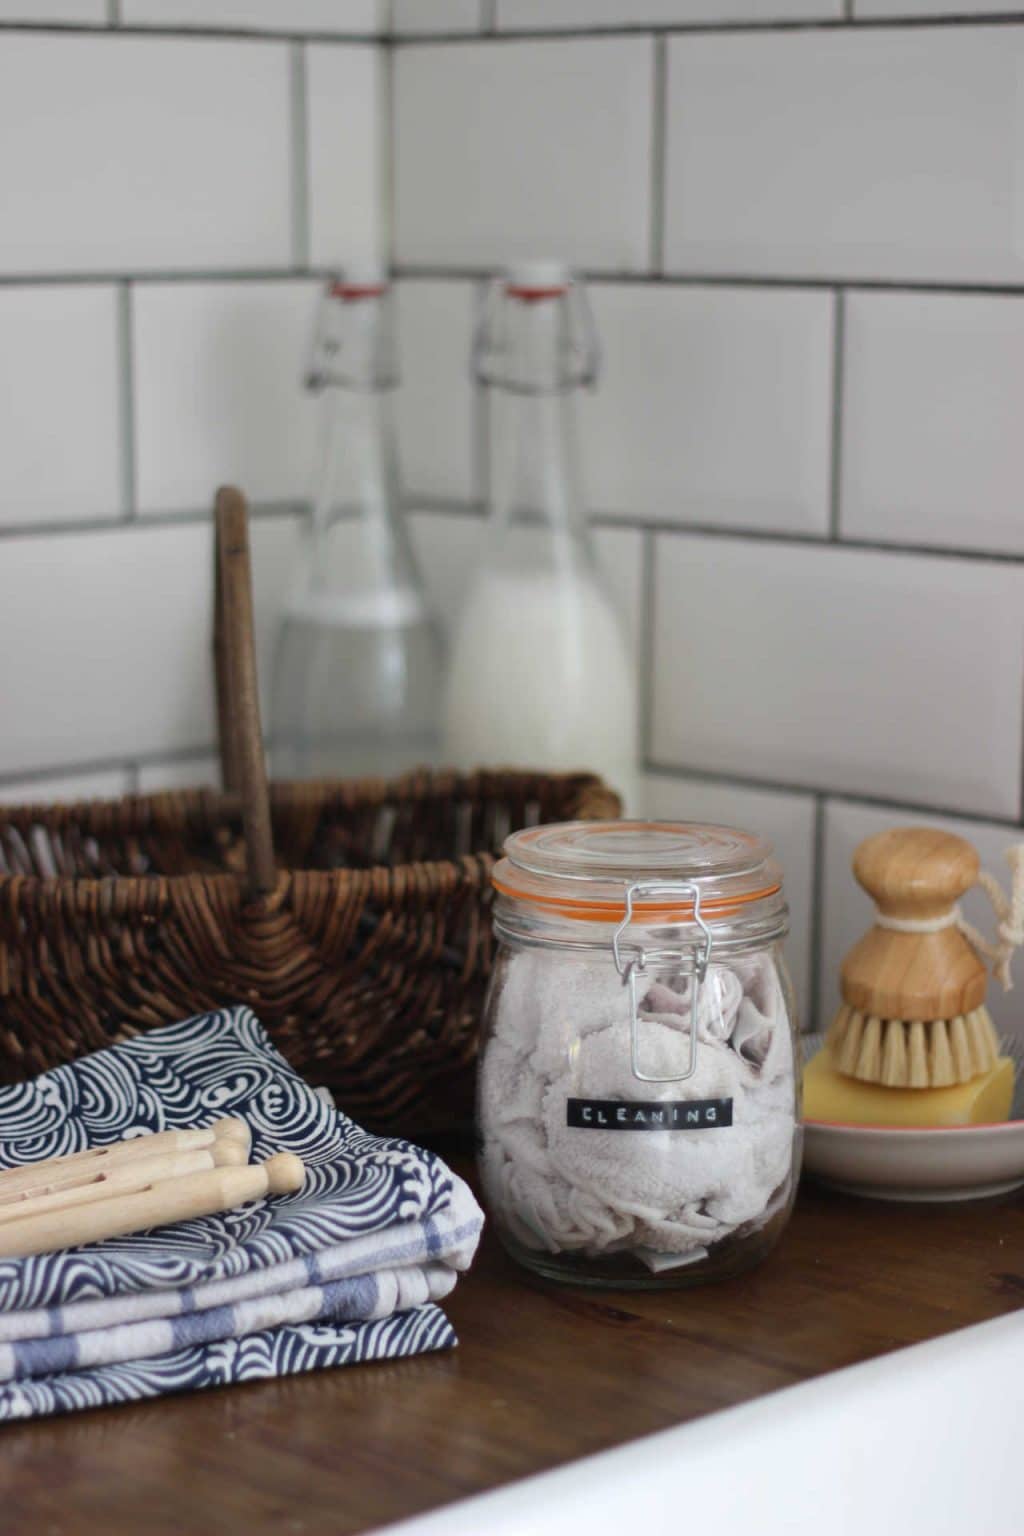 homemade cleaning wipes made with castile soap